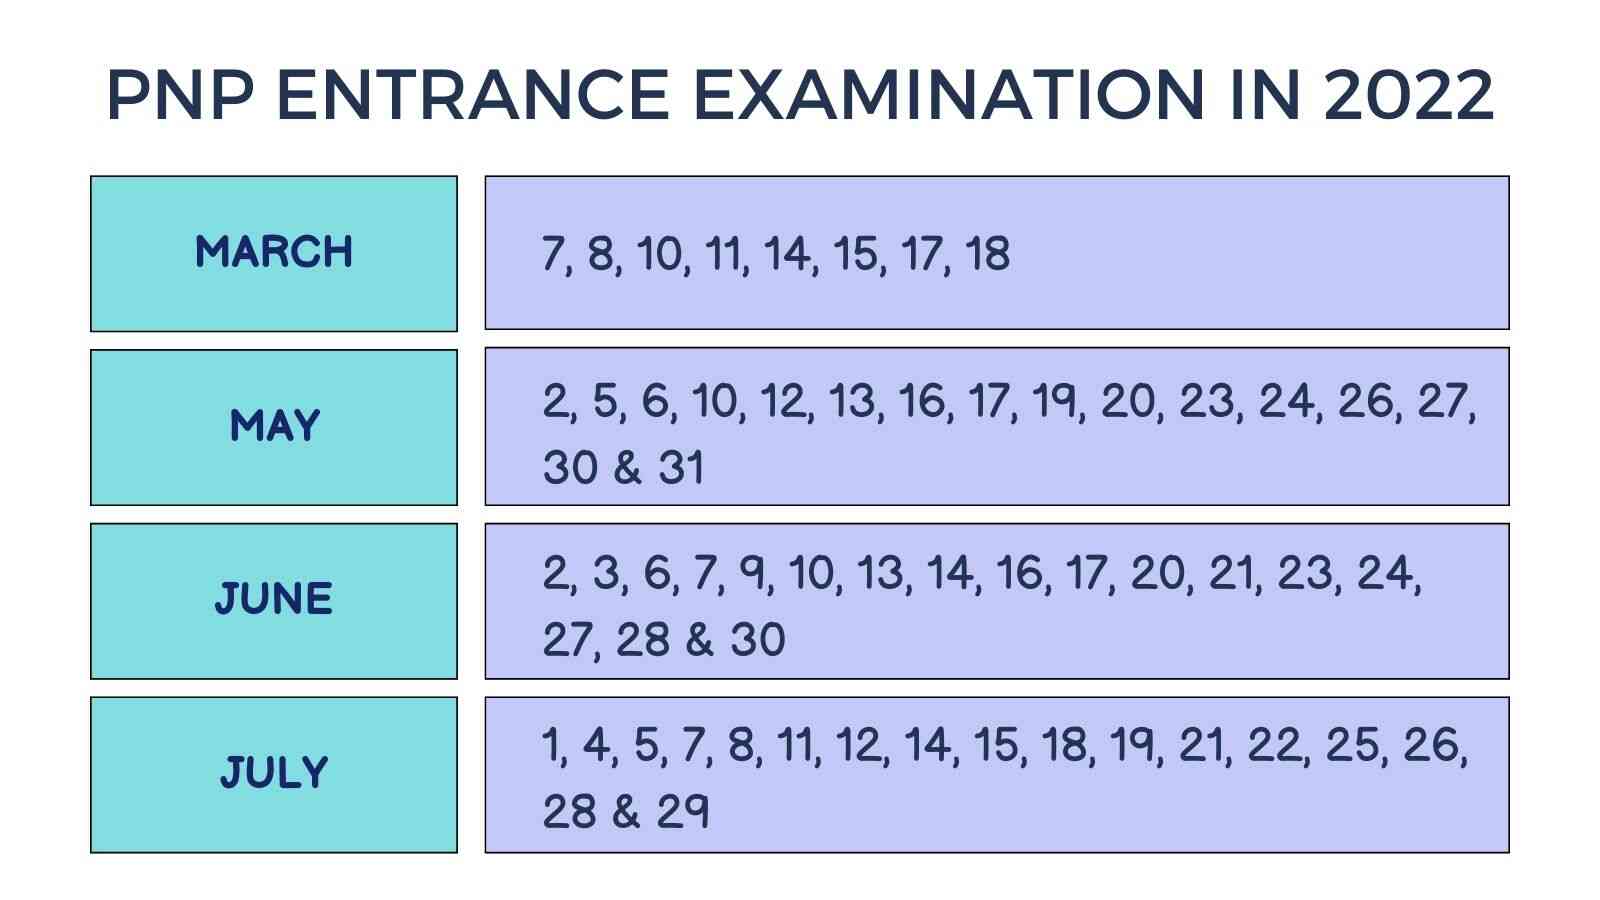 pnp entrance exam schedule and requirements 2022